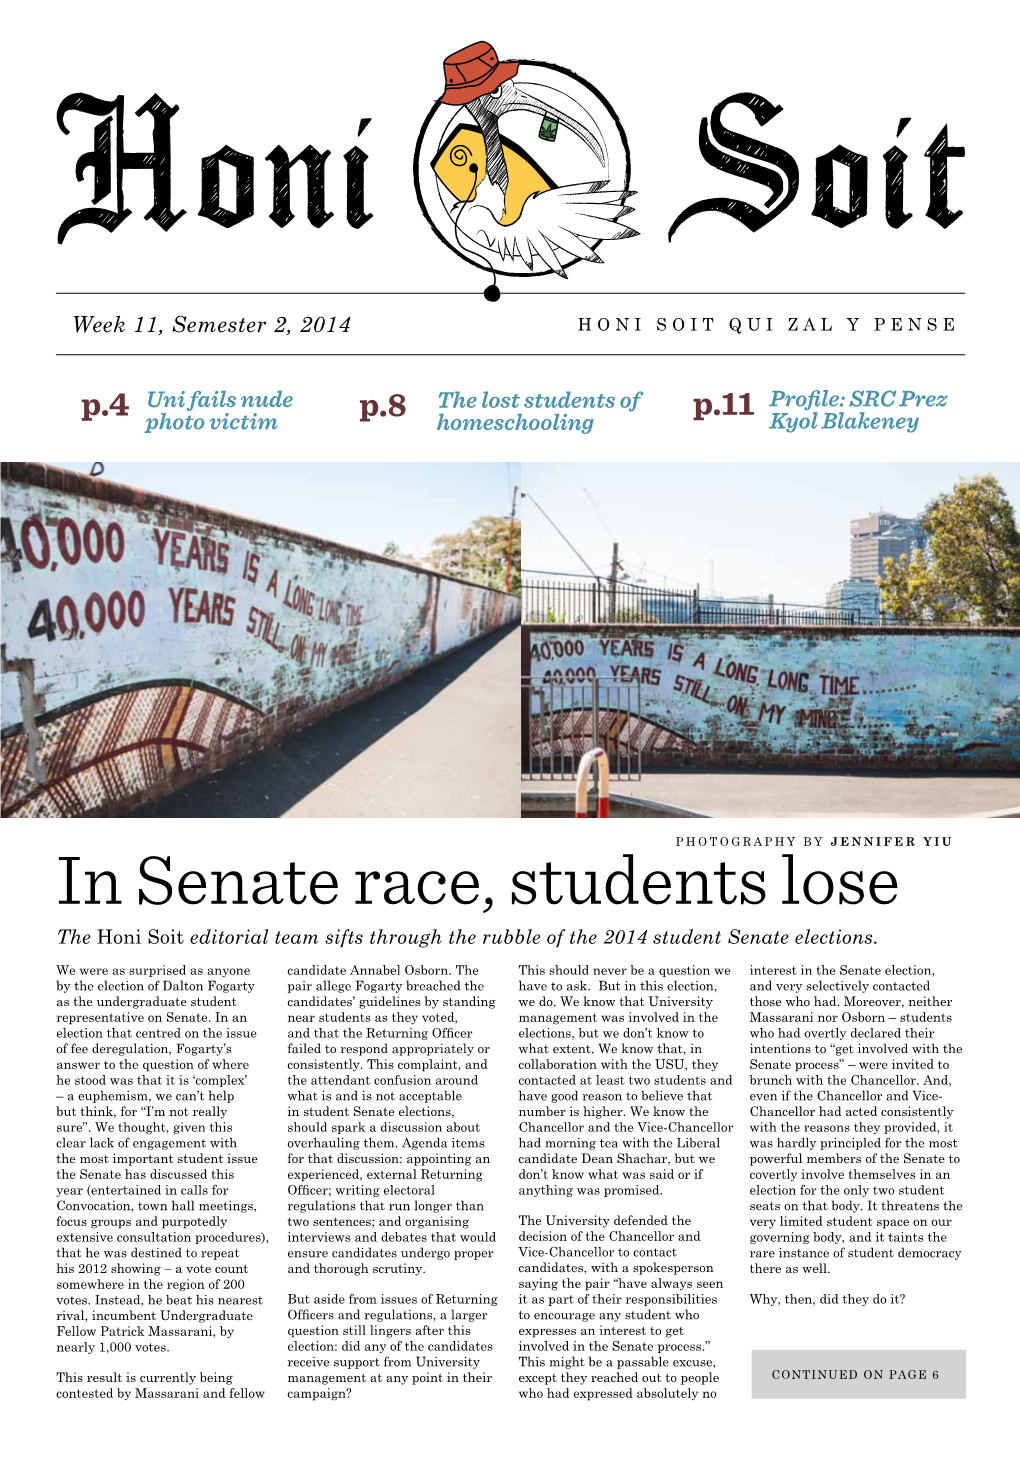 In Senate Race, Students Lose the Honi Soit Editorial Team Sifts Through the Rubble of the 2014 Student Senate Elections